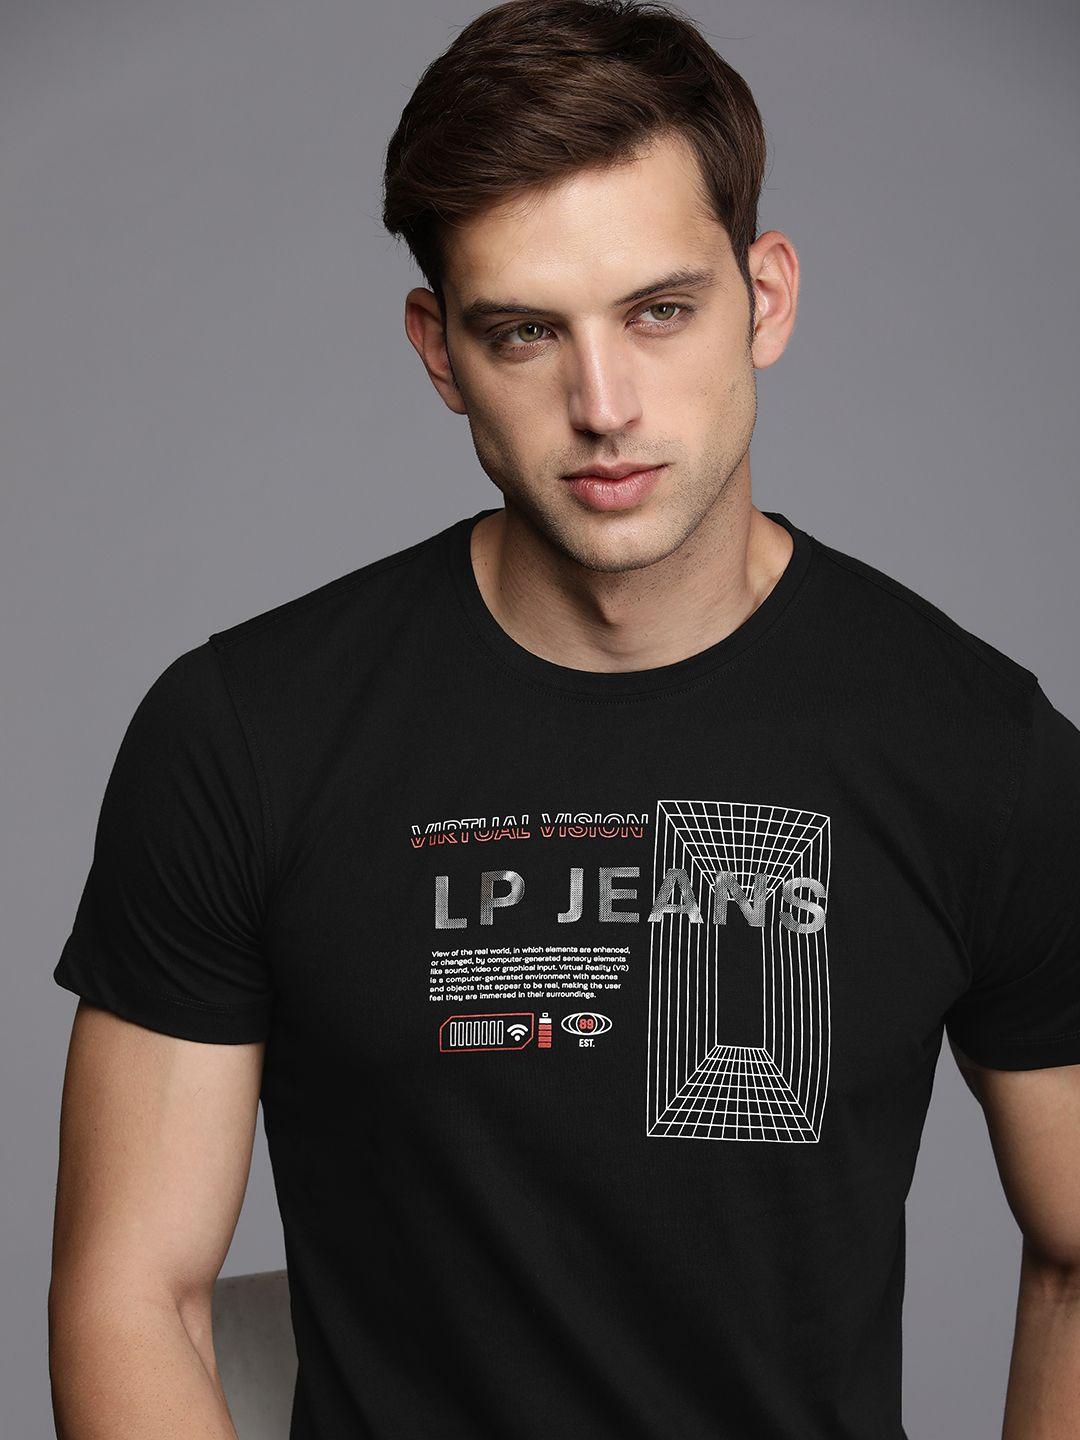 louis-philippe-jeans-brand-logo-printed-pure-cotton-slim-fit-t-shirt